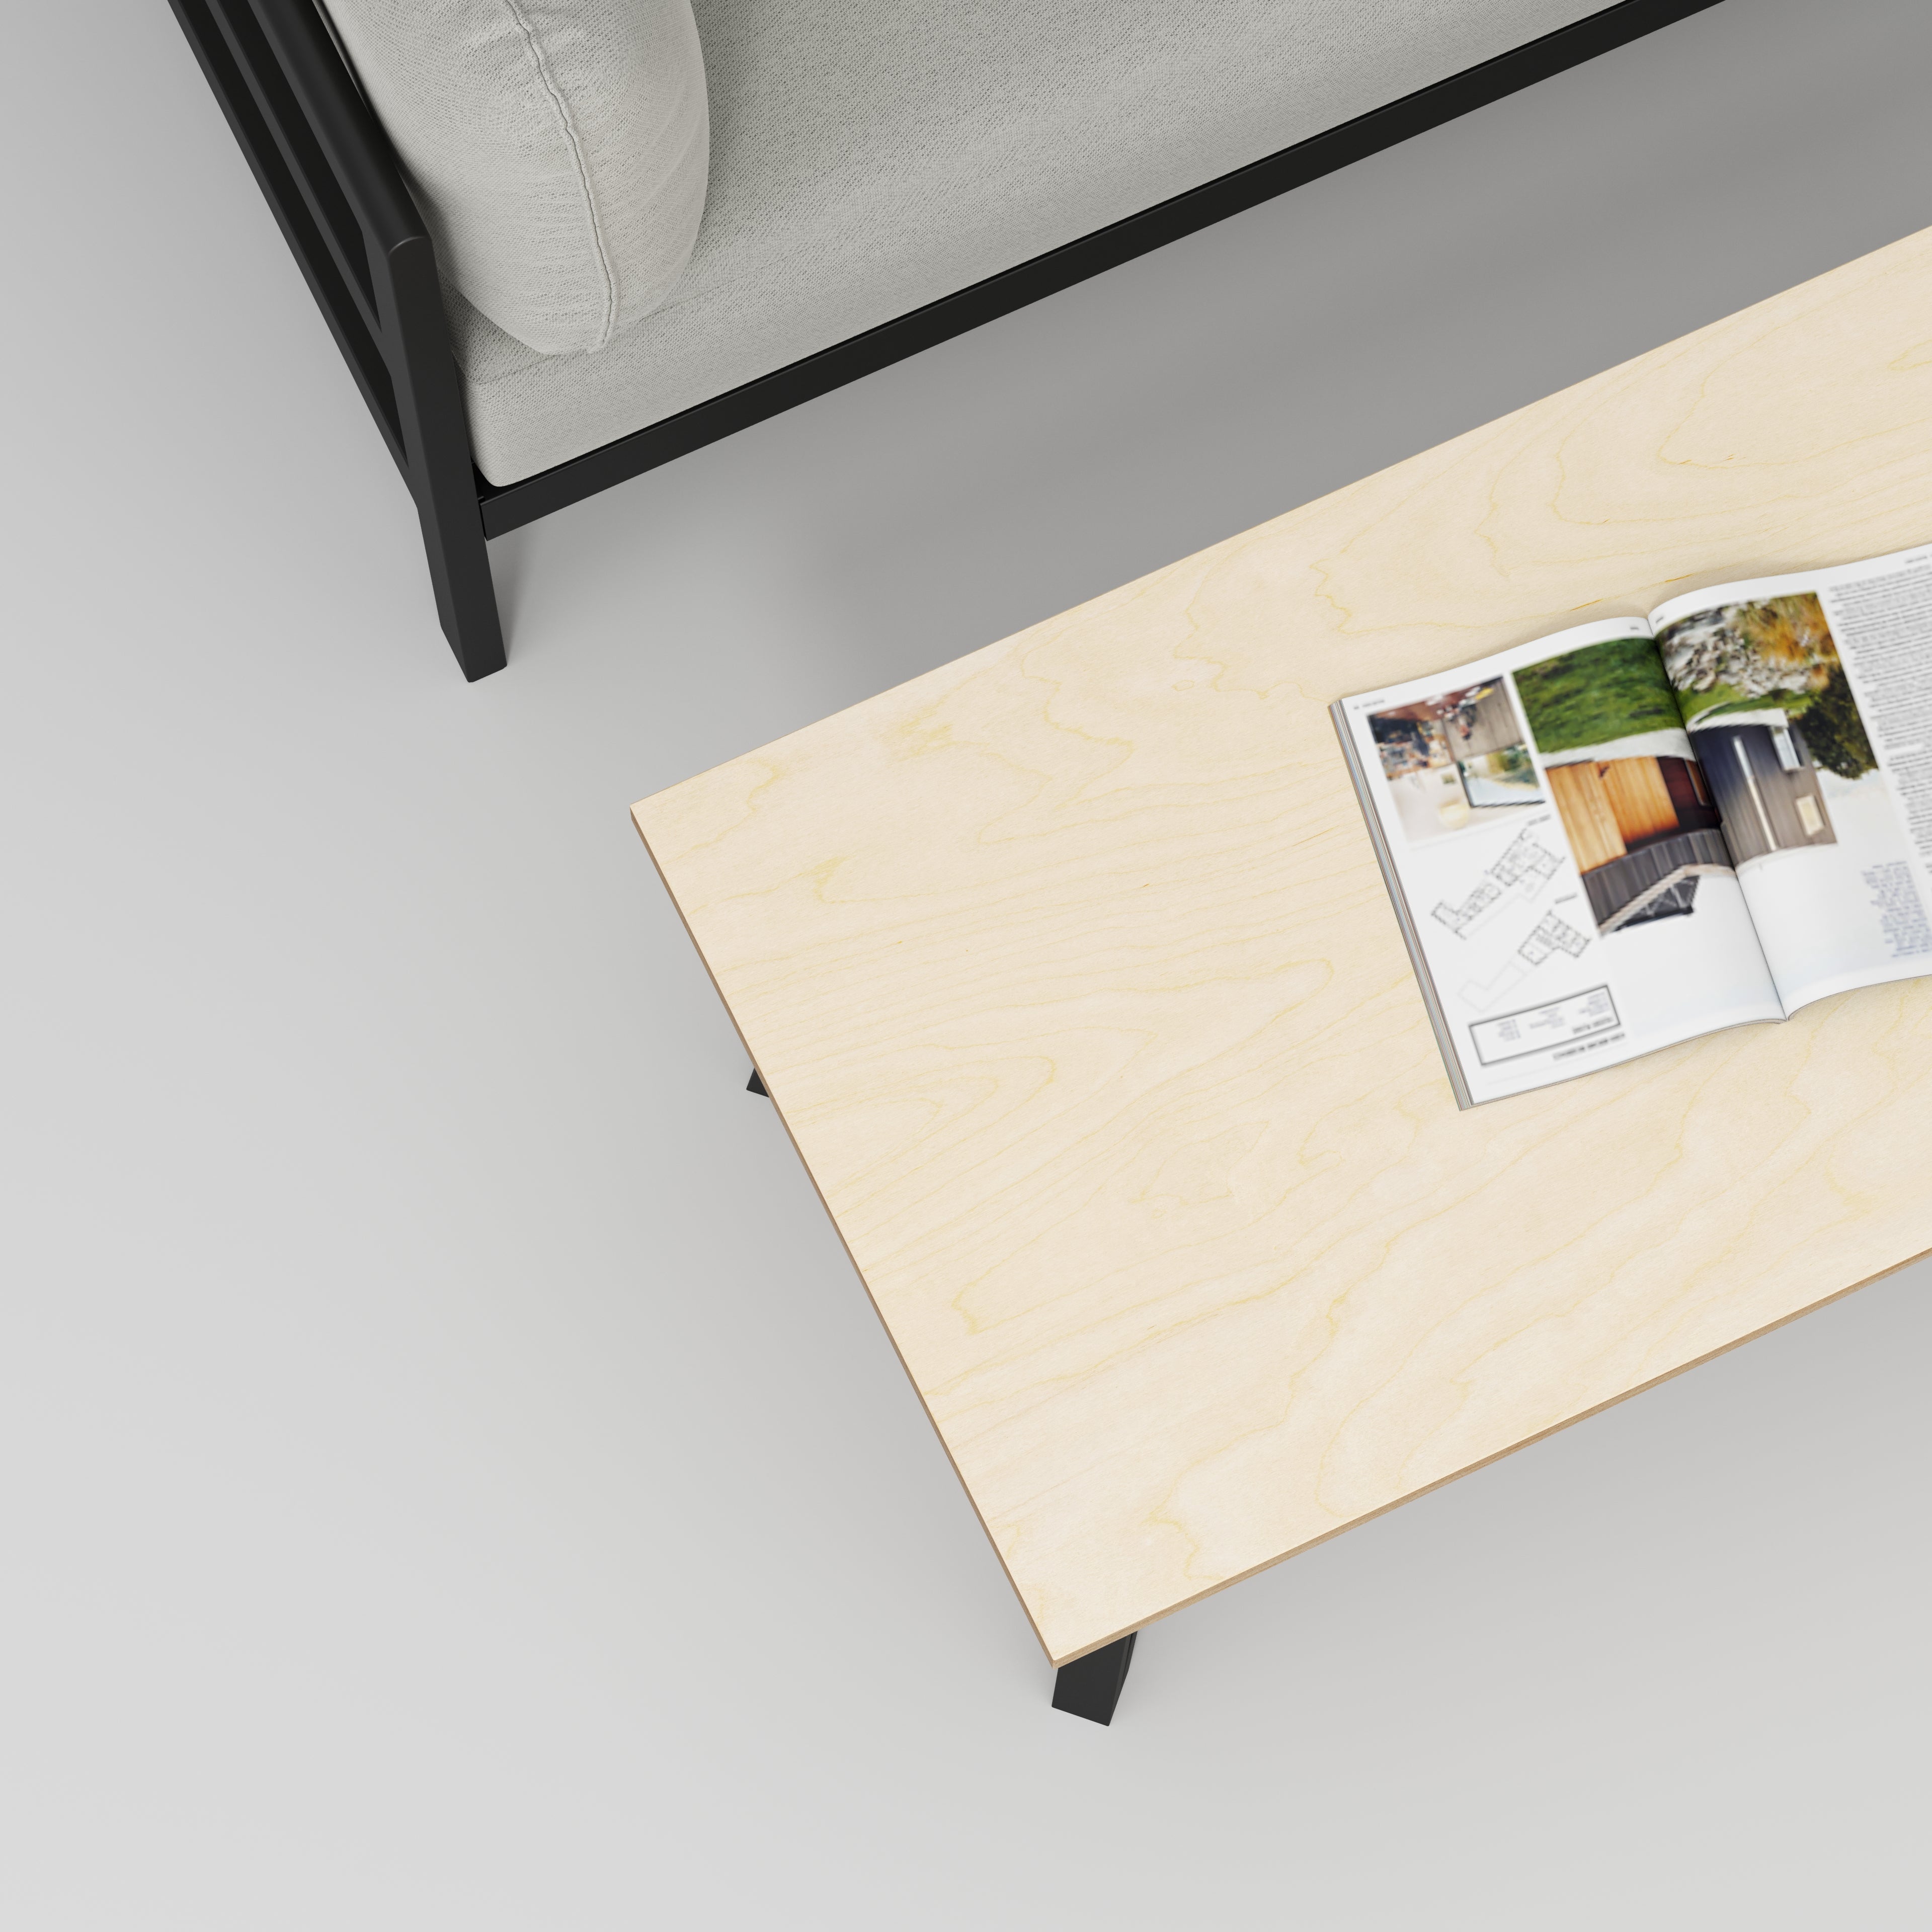 Coffee Table with Black Box Hairpin Legs - Plywood Birch - 1200(w) x 600(d) x 425(h)